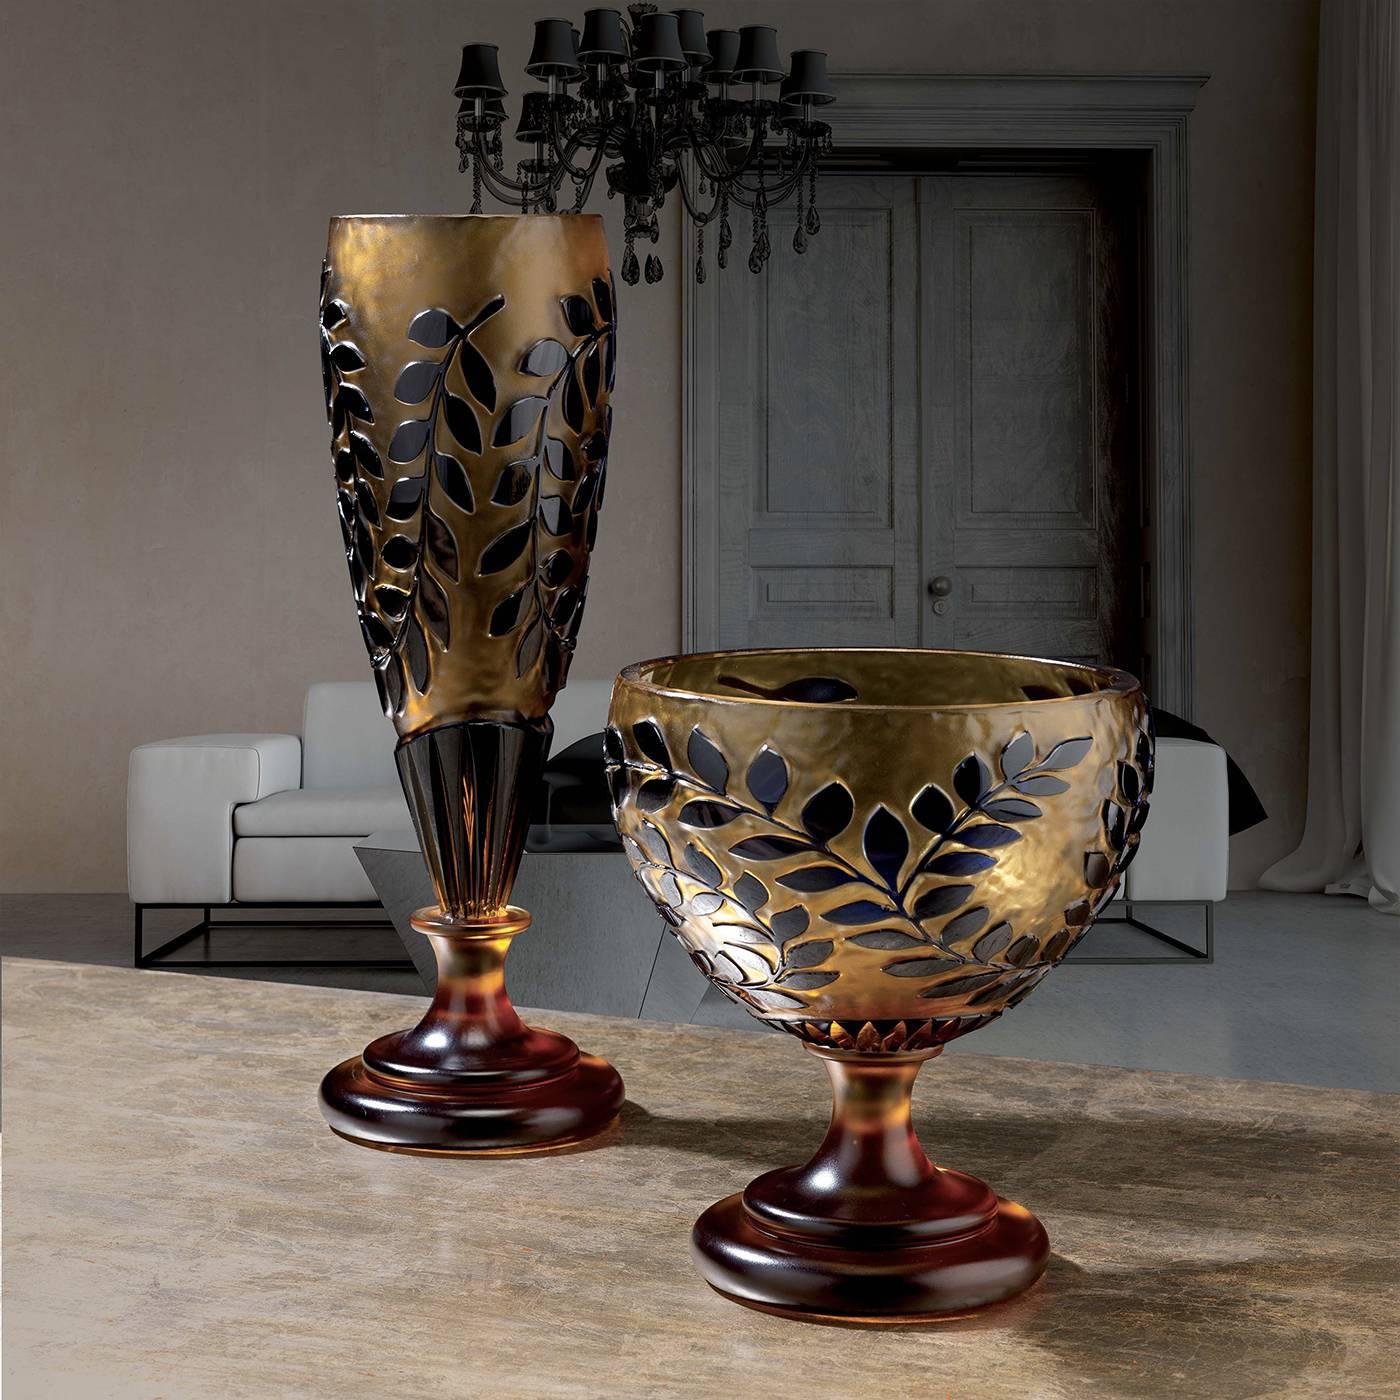 A stunning decorative frond motif adorns the 'incamiciato' crystal body with gold leaf of this Fine footed crystal cup. The handcrafted, blown body features an elegant decoration of blue leaves, rendered with a sandblasting process, that emerge from